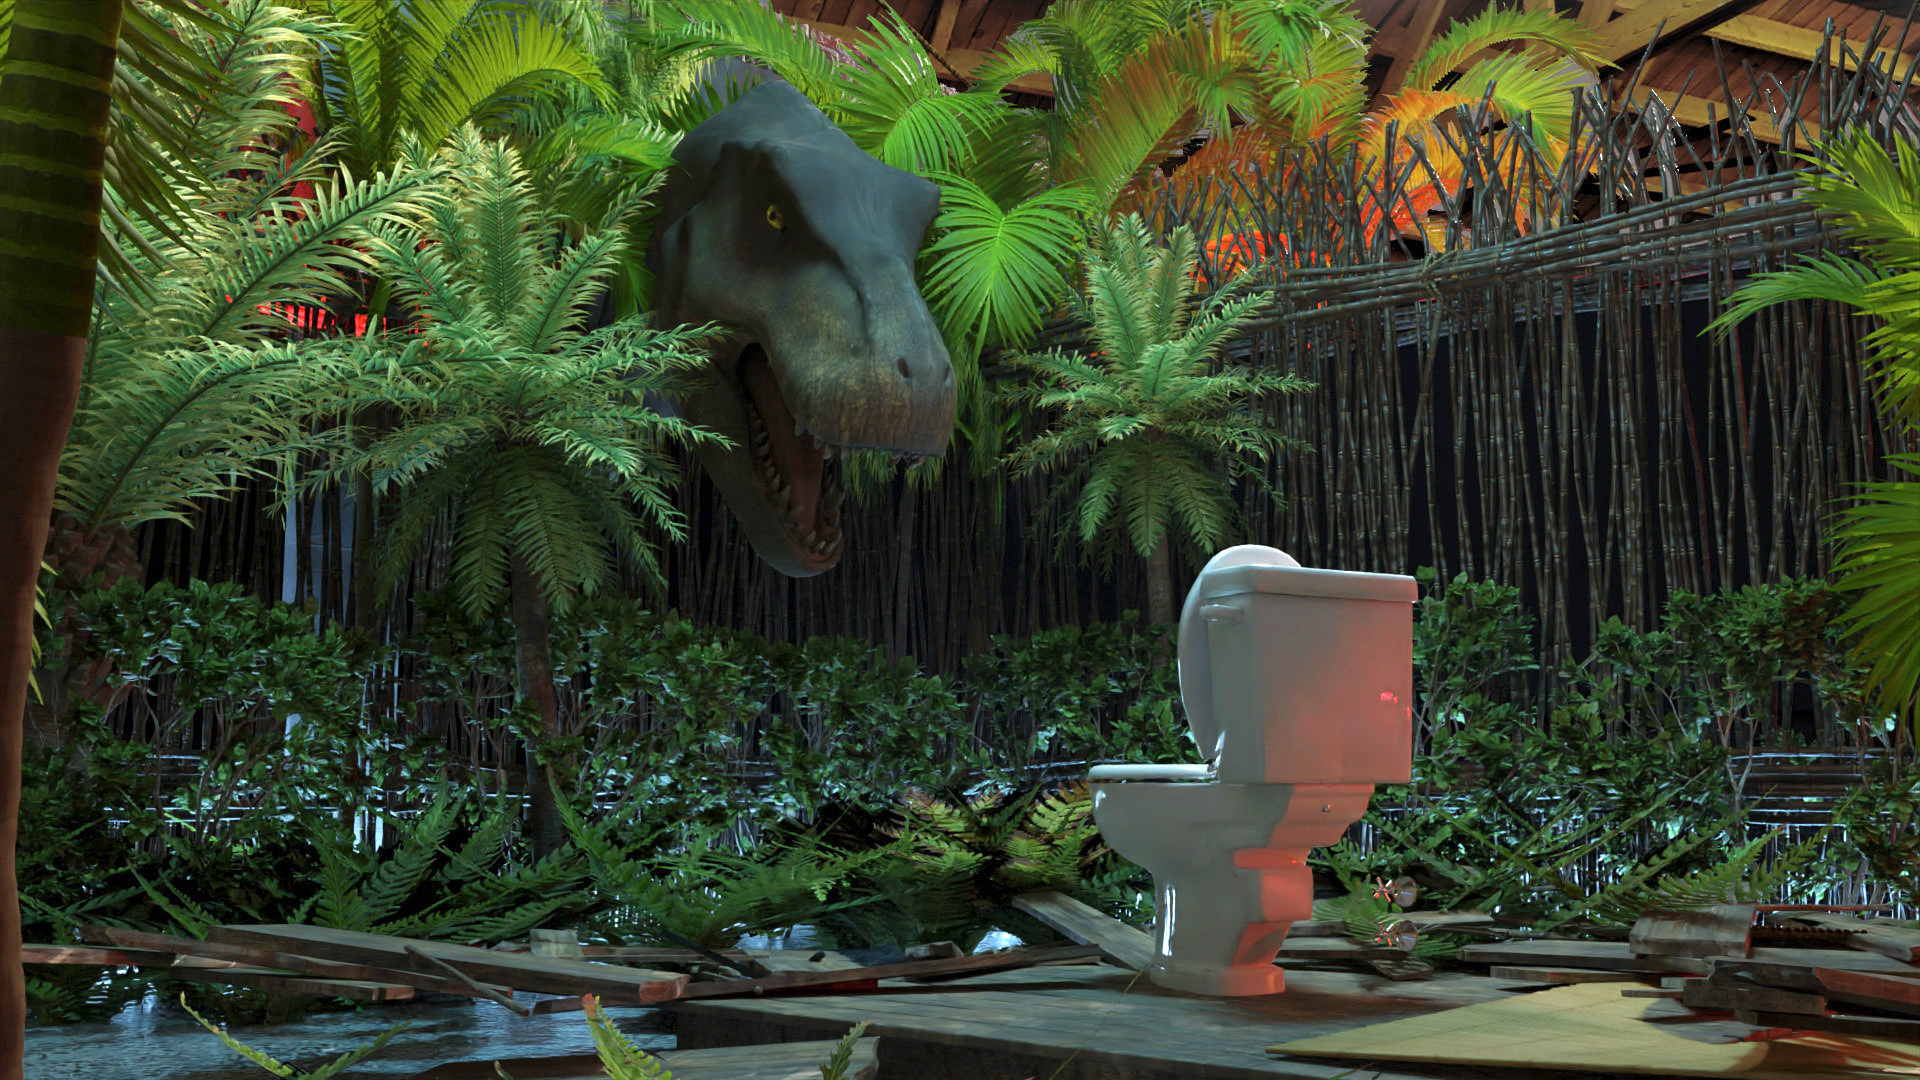 A T-Rex pops out of the trees to find a lone toilet lit by red light